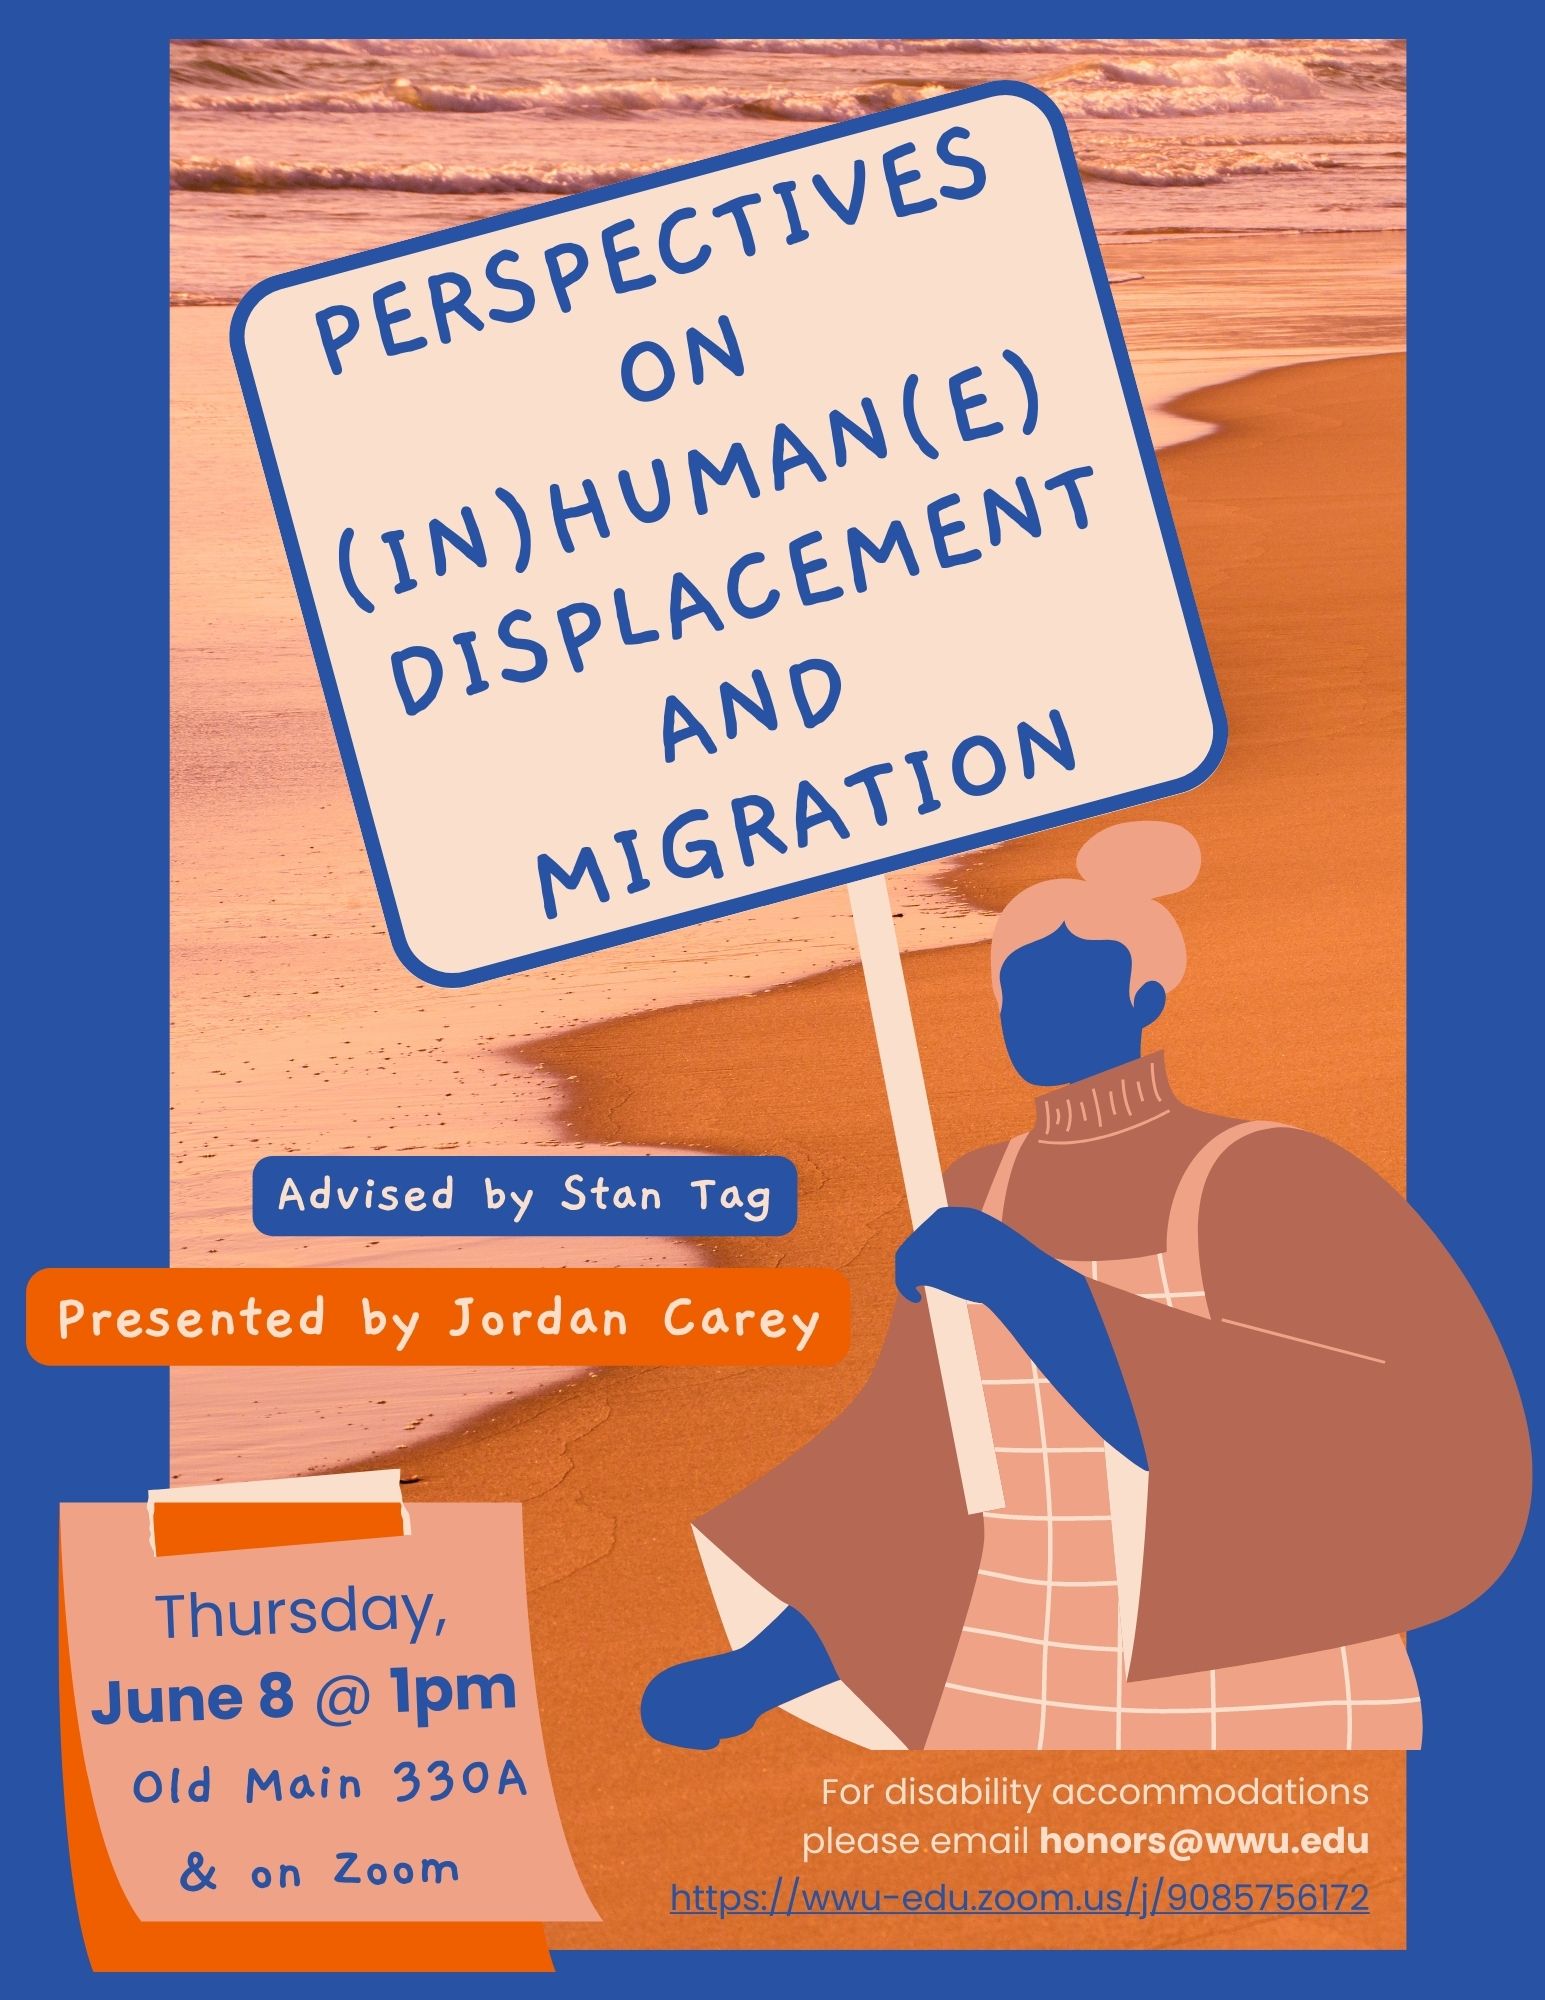 A poster with a blue border surrounding an orange and pink photograph of waves on a sandy shore. On the bottom right corner, there is a mauve and blue graphic of a woman holding a sign. Text reads: "Perspectives on (In)human(e) Displacement and Migration. Advised by Stan Tag, Presented by Jordan Carey. Thursday June 8 @ 1pm. Old Main 330A & on Zoom. For disability accommodations please email honors@wwu.edu."